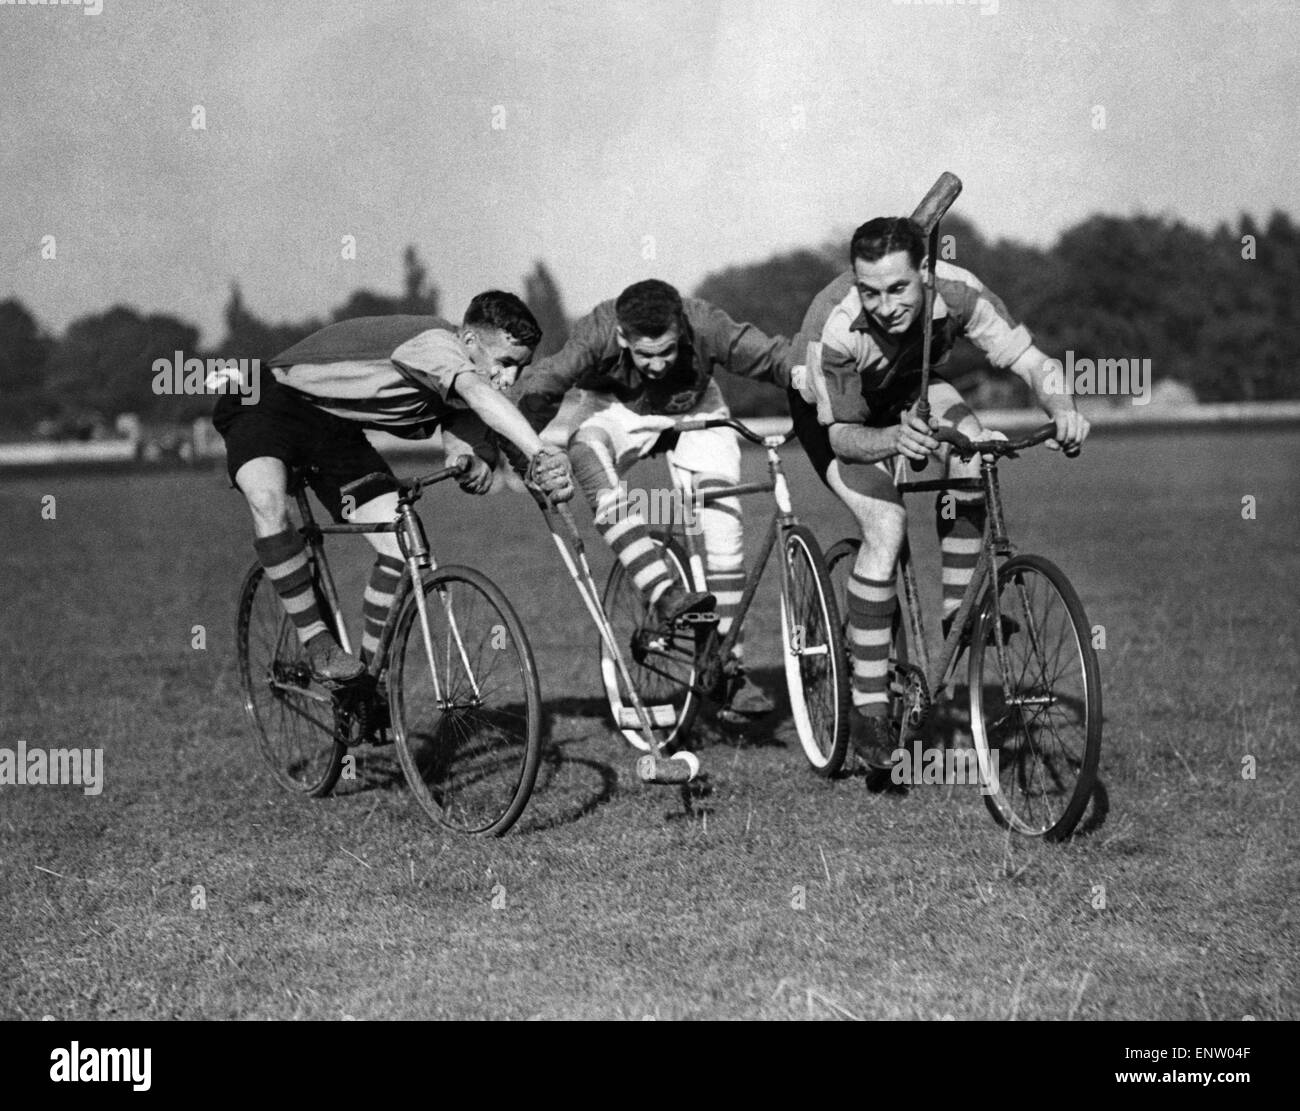 Three fellows playing Cycle polo which was invented in County Wicklow, Ireland, in 1891 by retired cyclist, Richard J. Mecredy. The sport is similar to traditional polo, except that bicycles are used instead of horses. 13th June 1937 Stock Photo